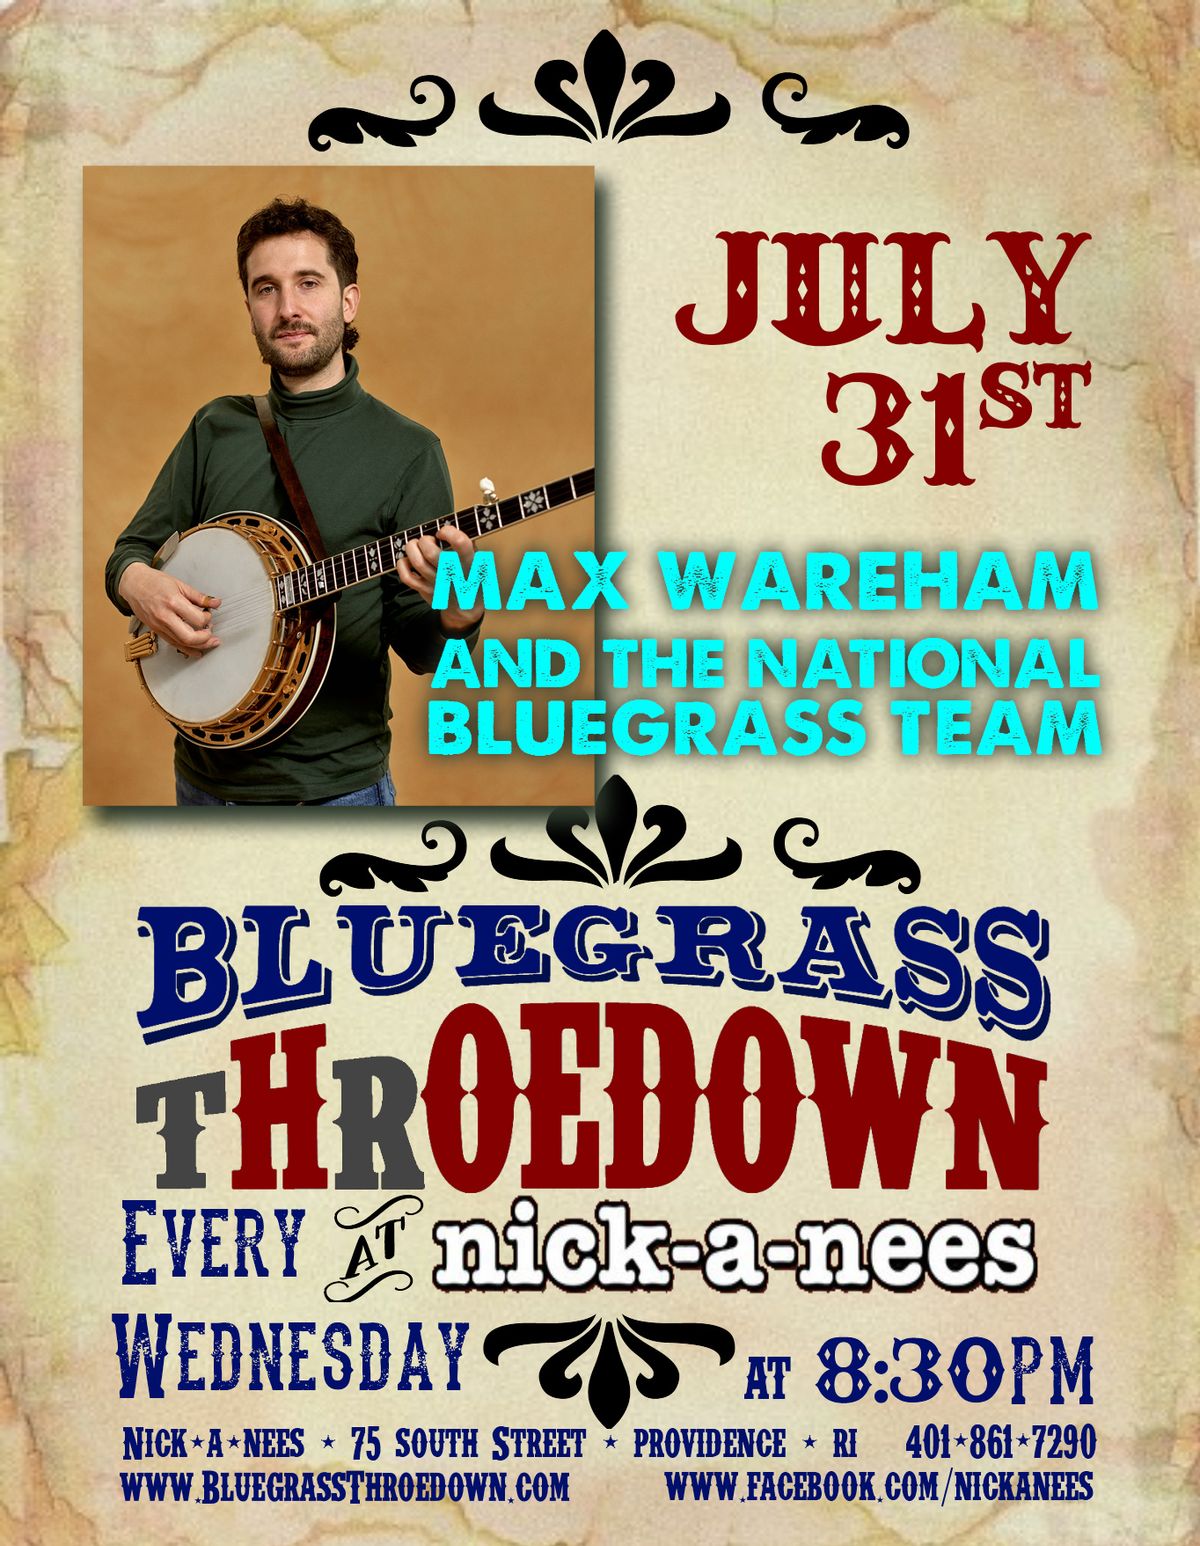 Max Wareham and the National Bluegrass Team at Nick-a-Nee's